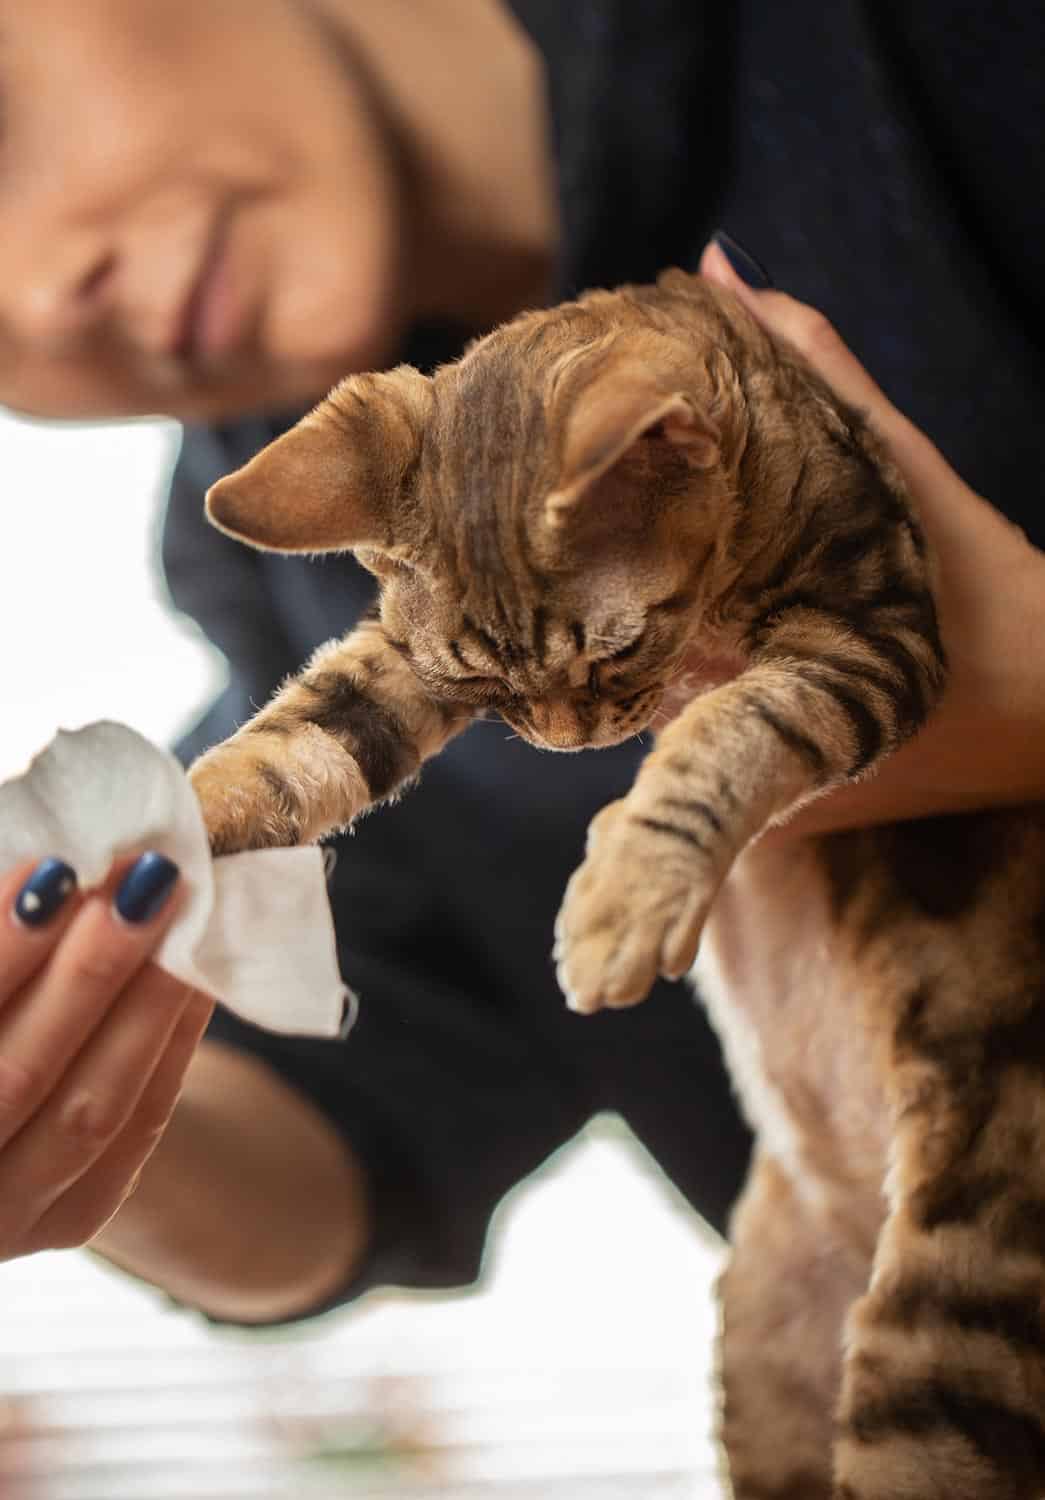 Owner cleaning dirty kitten paws after using litter box